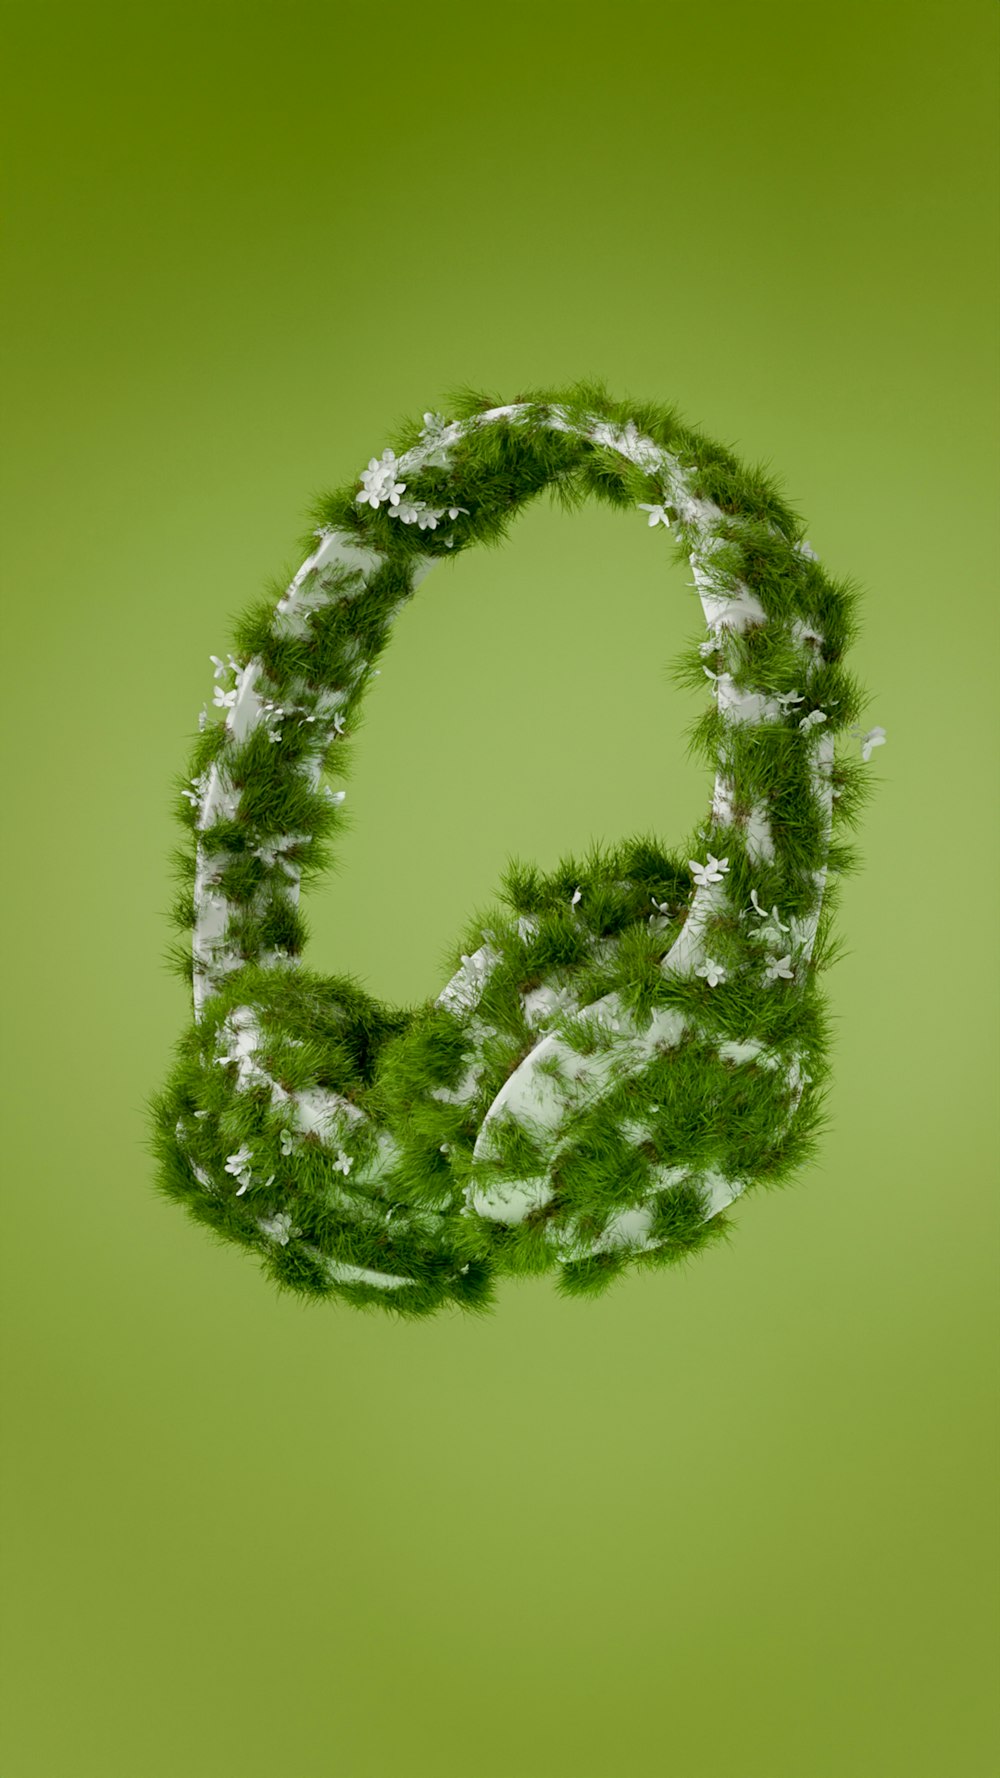 a letter made out of grass on a green background